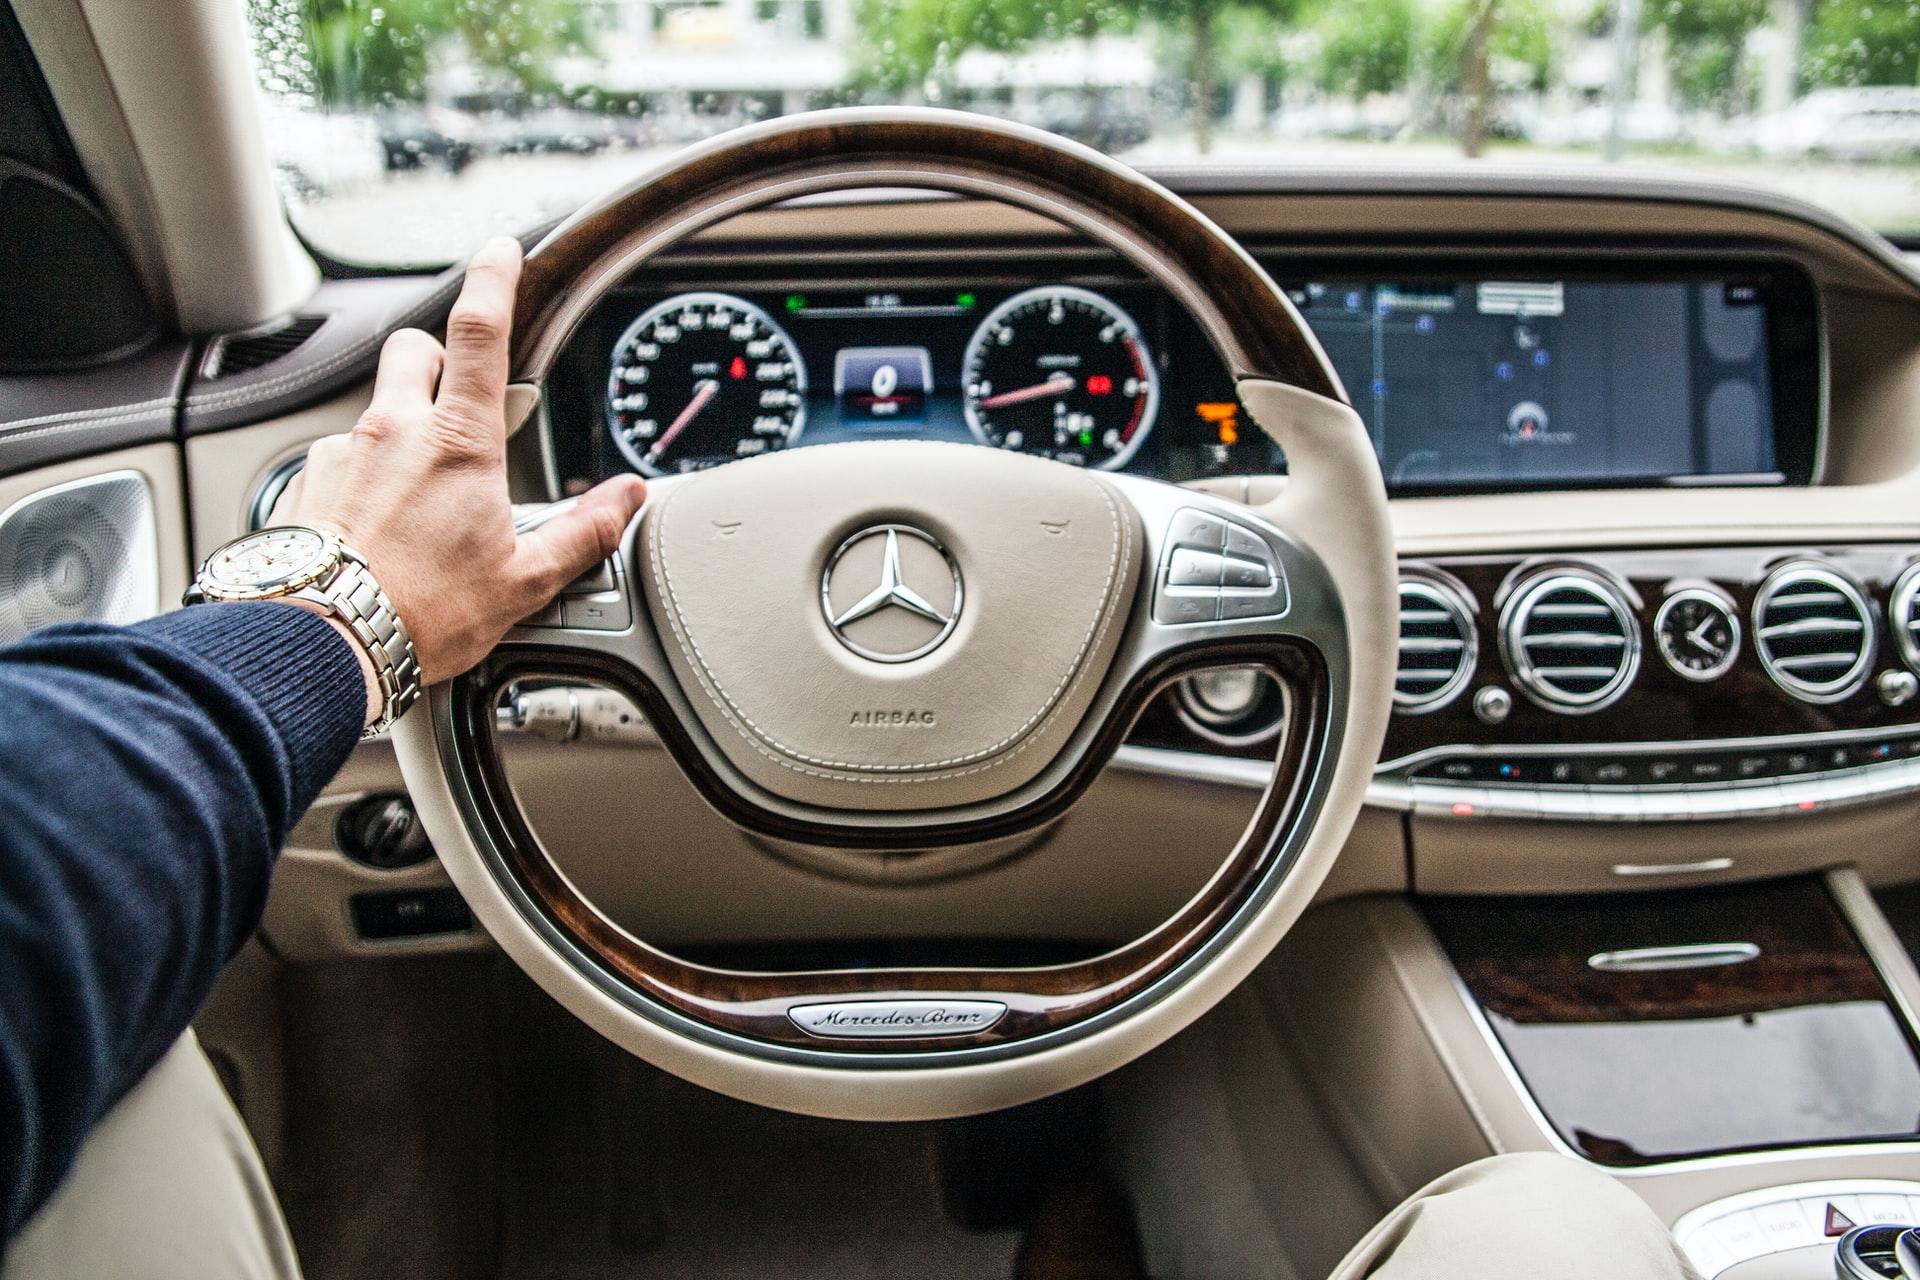 Tan Mercedes dash and wheel with driver